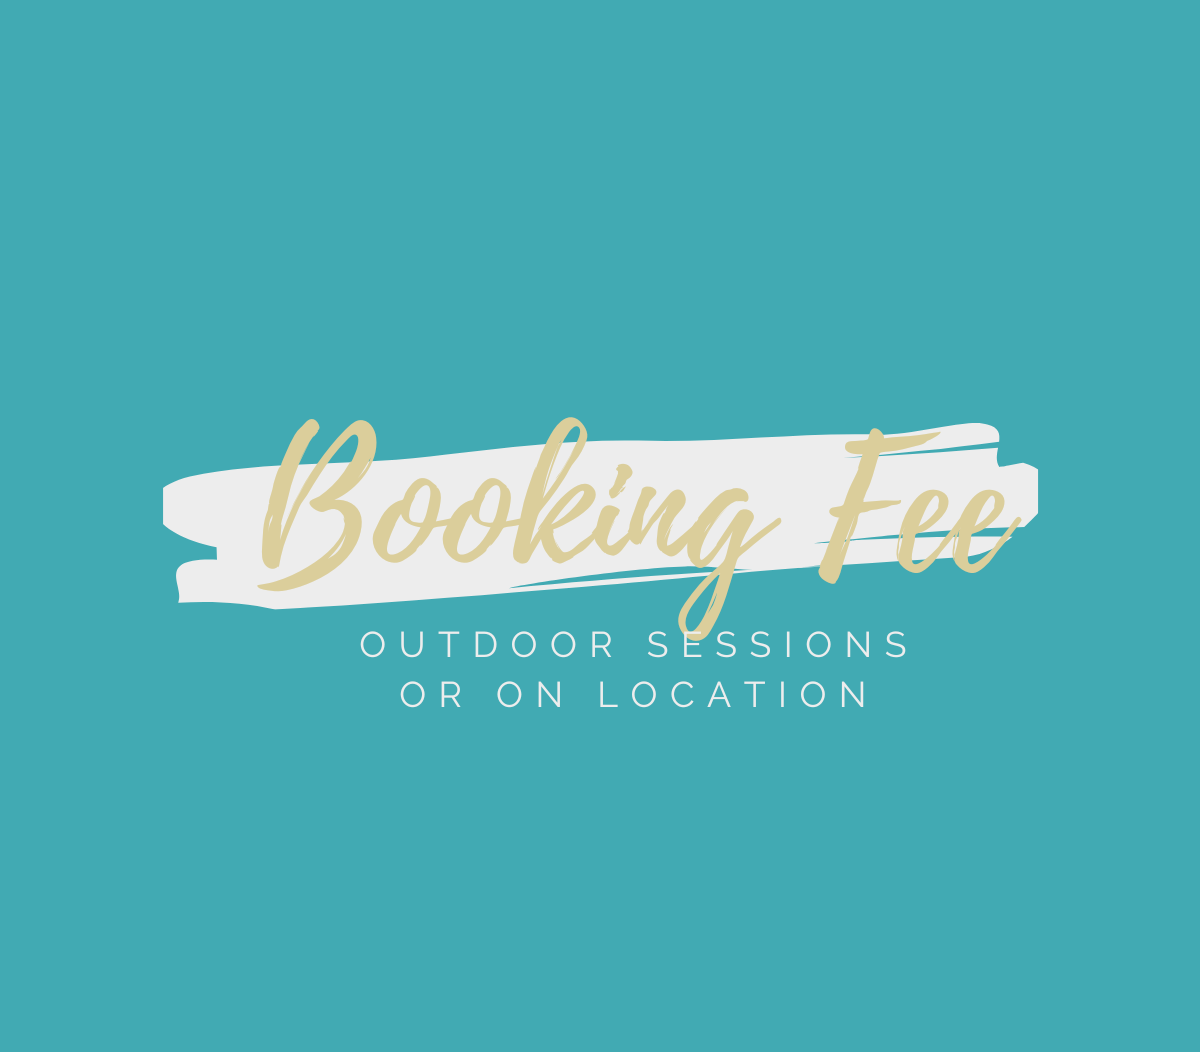 Outdoor Session-Booking fee